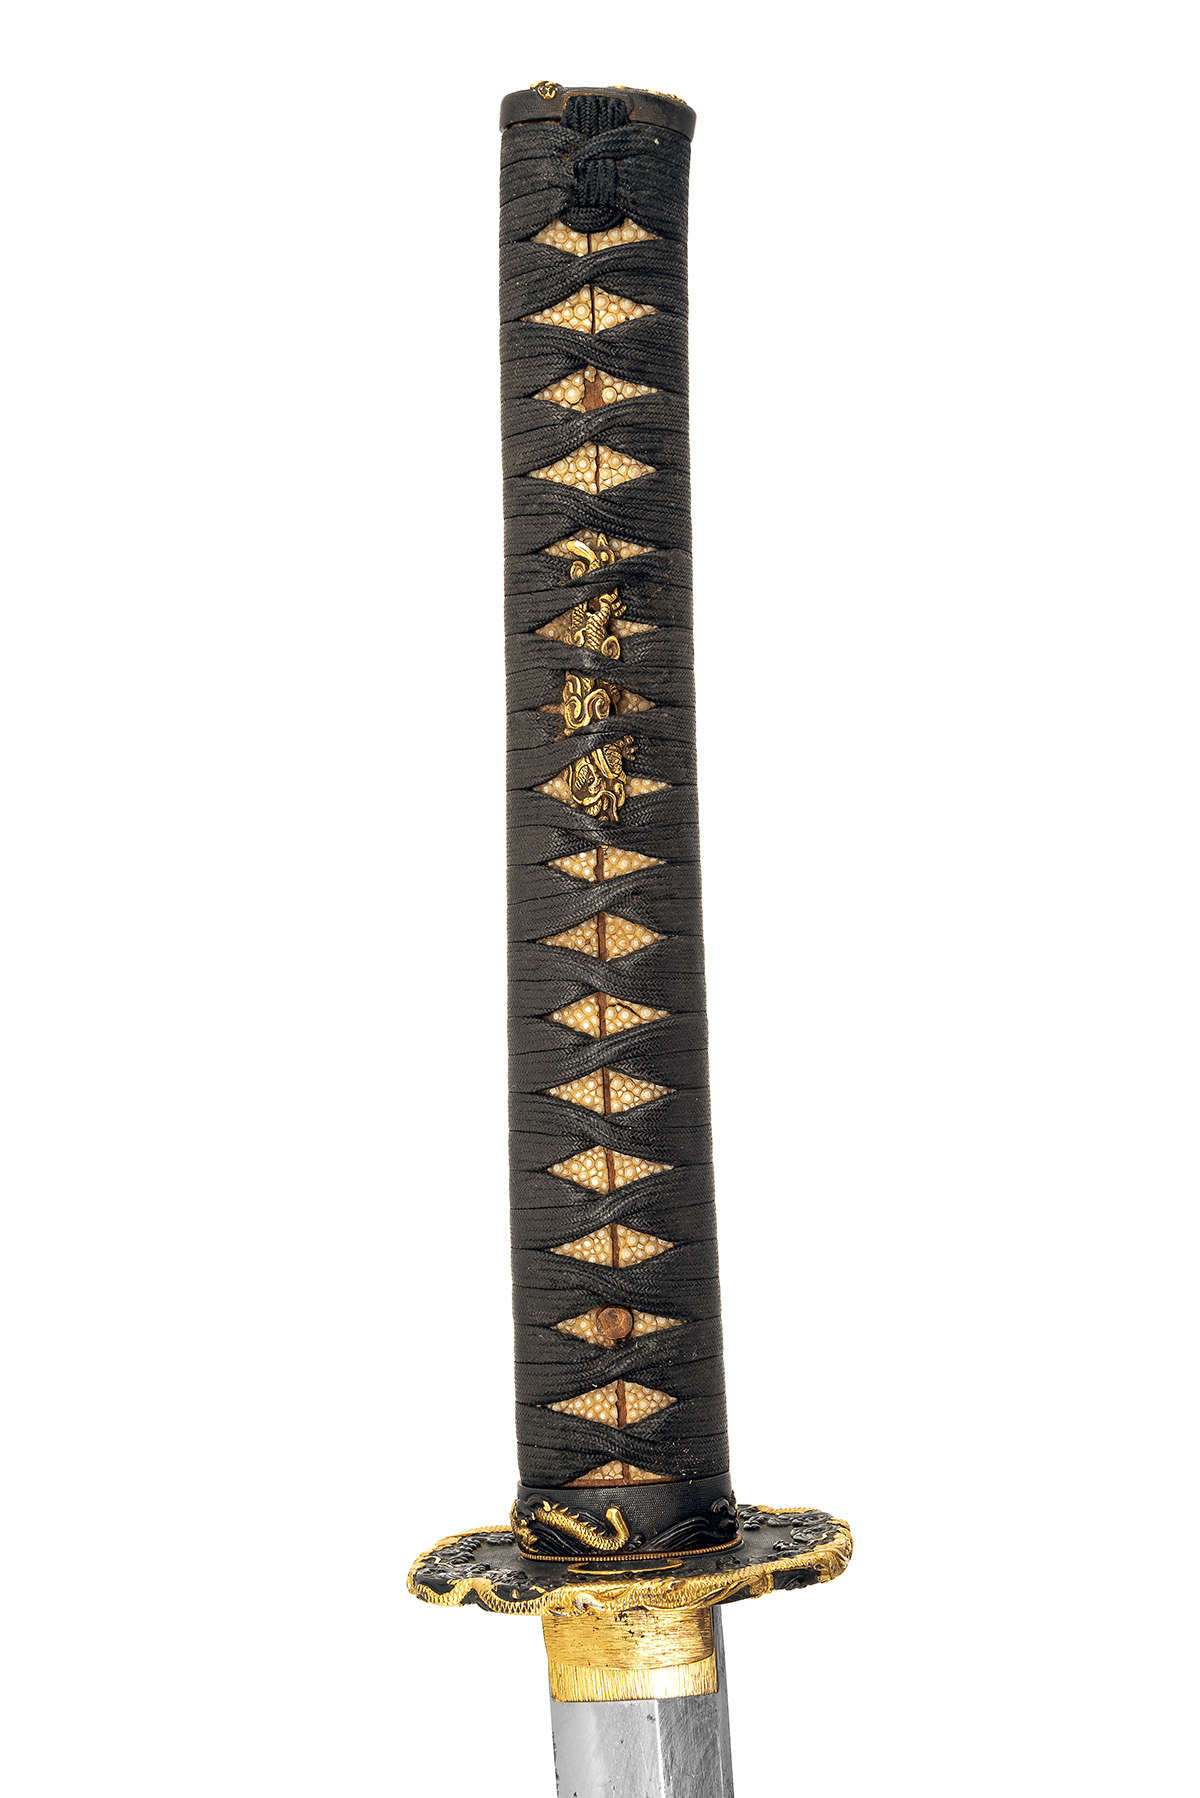 A JAPANESE KATANA WITH SIGNED BLADE, mid 19th century, with curved 28in. blade (some thin staining), - Image 3 of 7